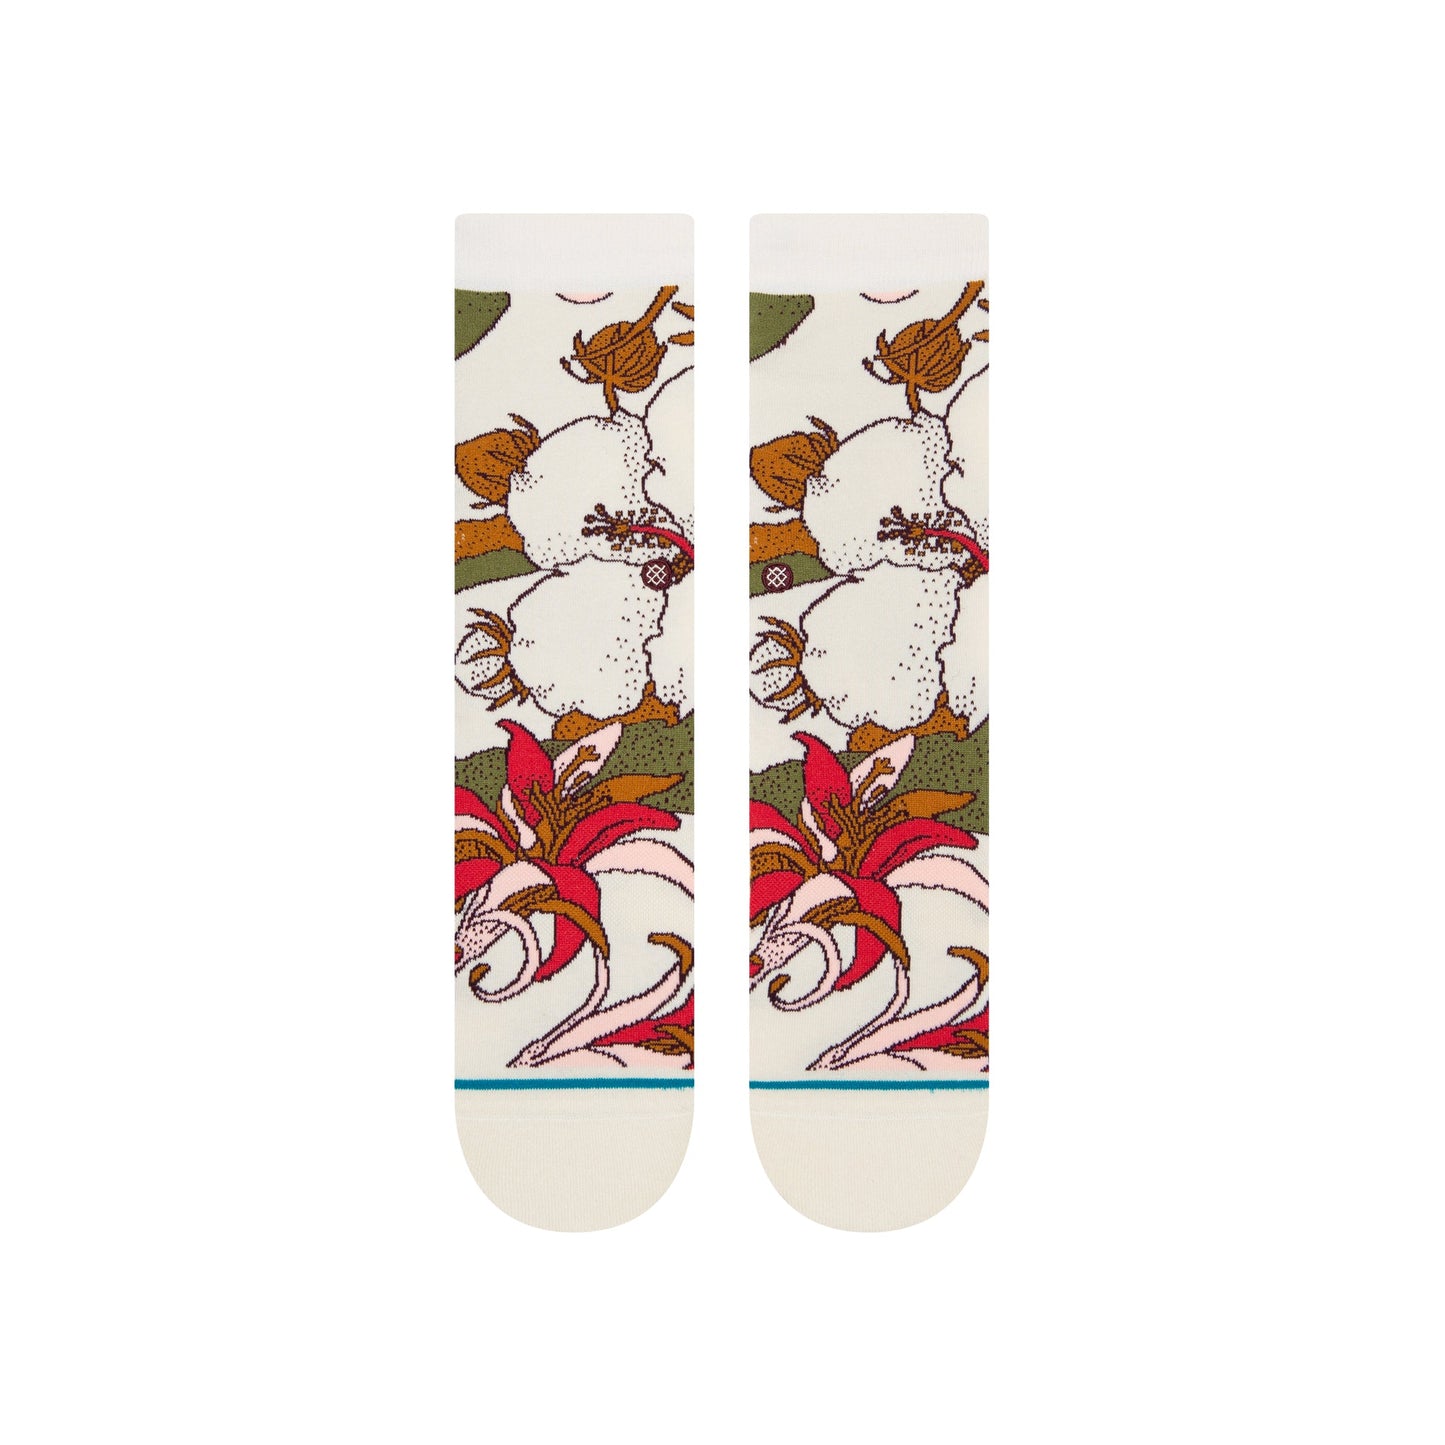 Chaussettes mi-mollet blanches Flowers and Fields de Stance